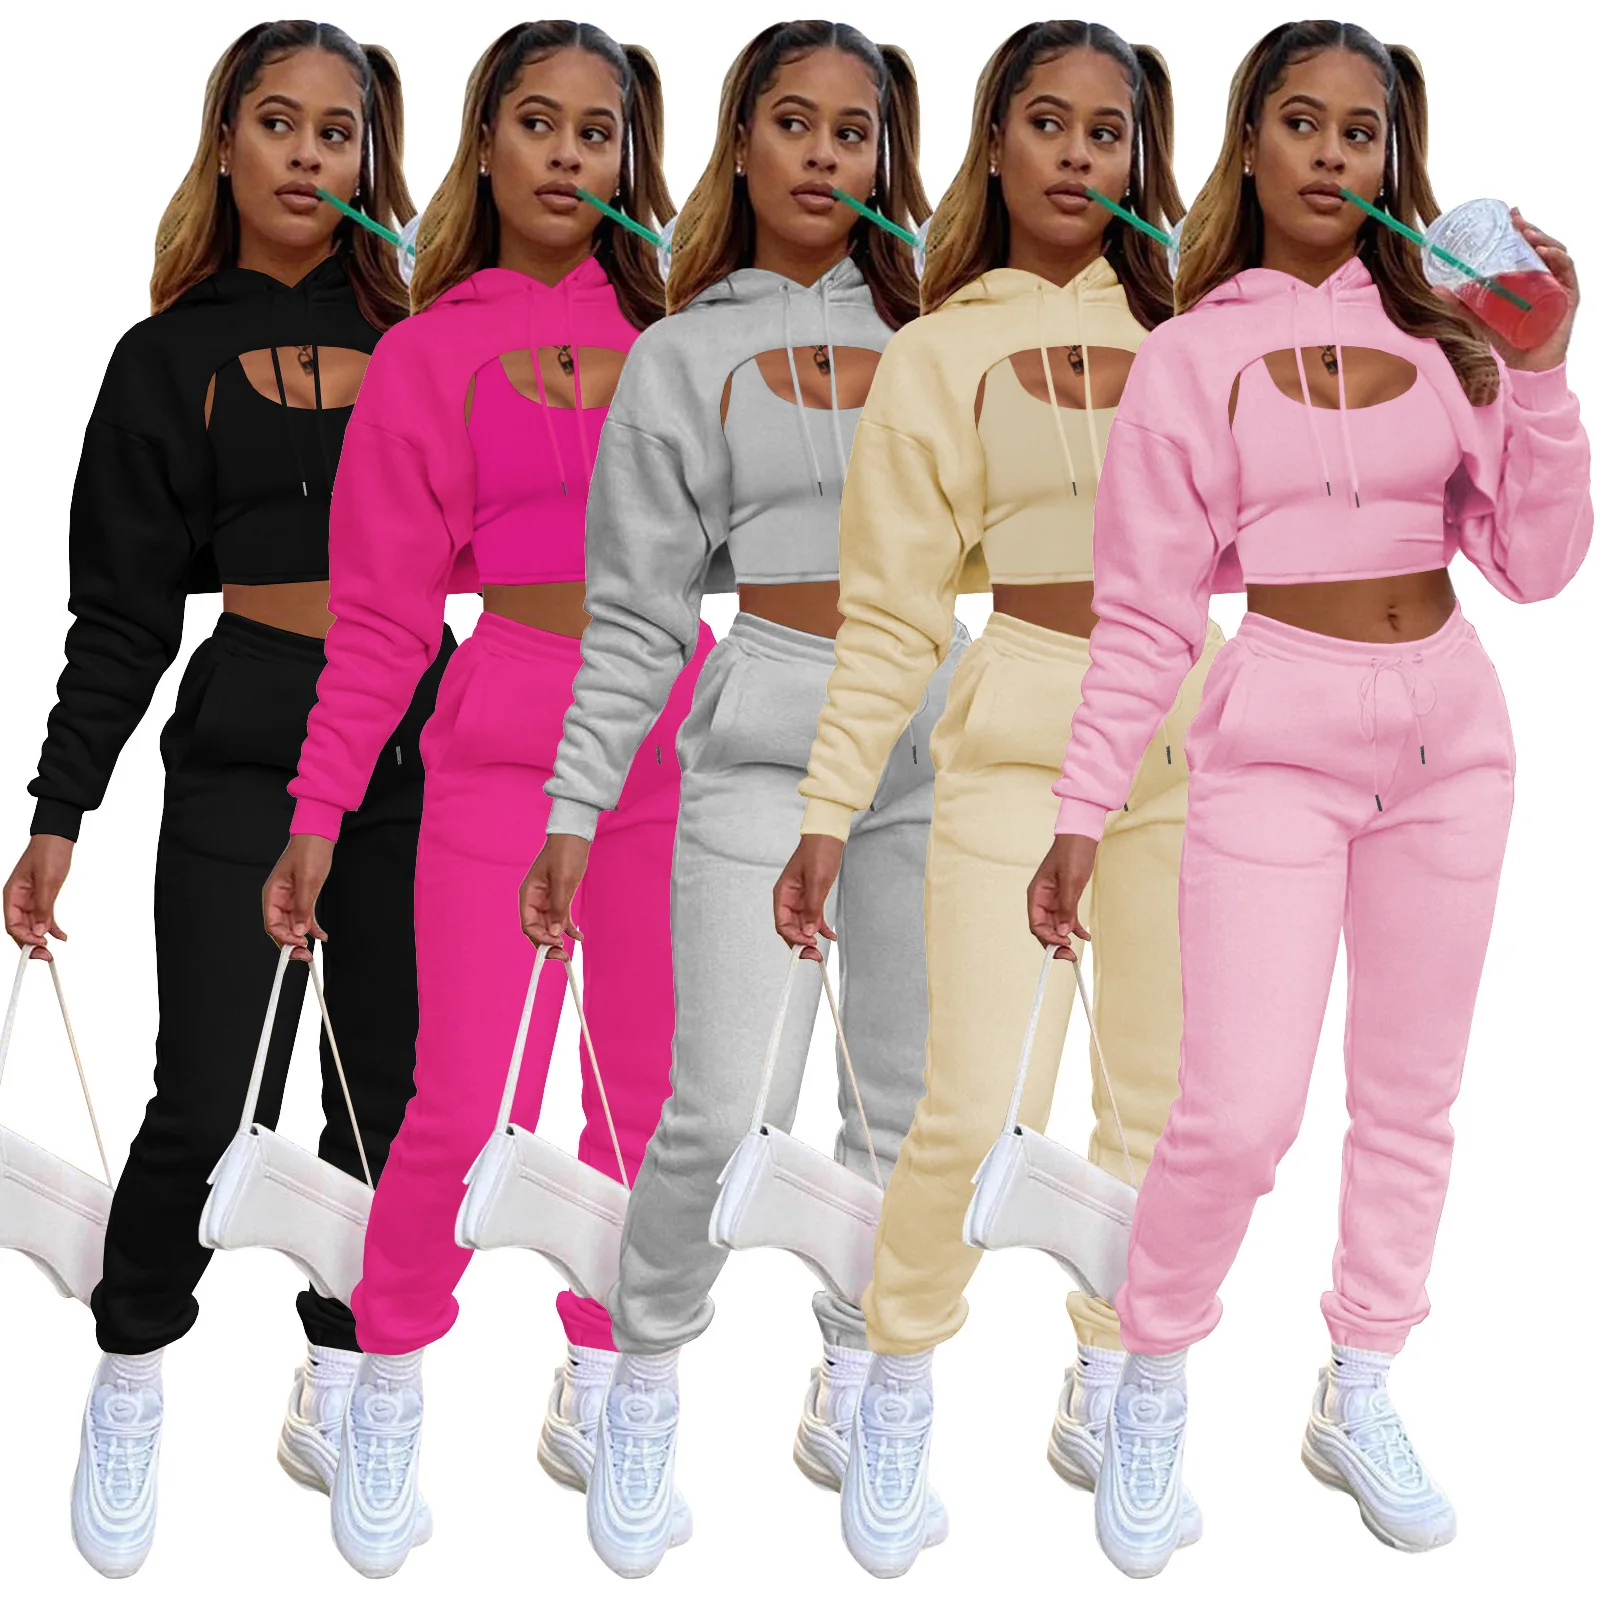 

2021 Fall Winter Clothes Casual Women Velour Hooded Sweatshirts Crop Top Velvet Three 3 Pieces Lounge Wear Jogger Pants Set, Pink,red,black,rose red,deep gray,apricot,blue,brown